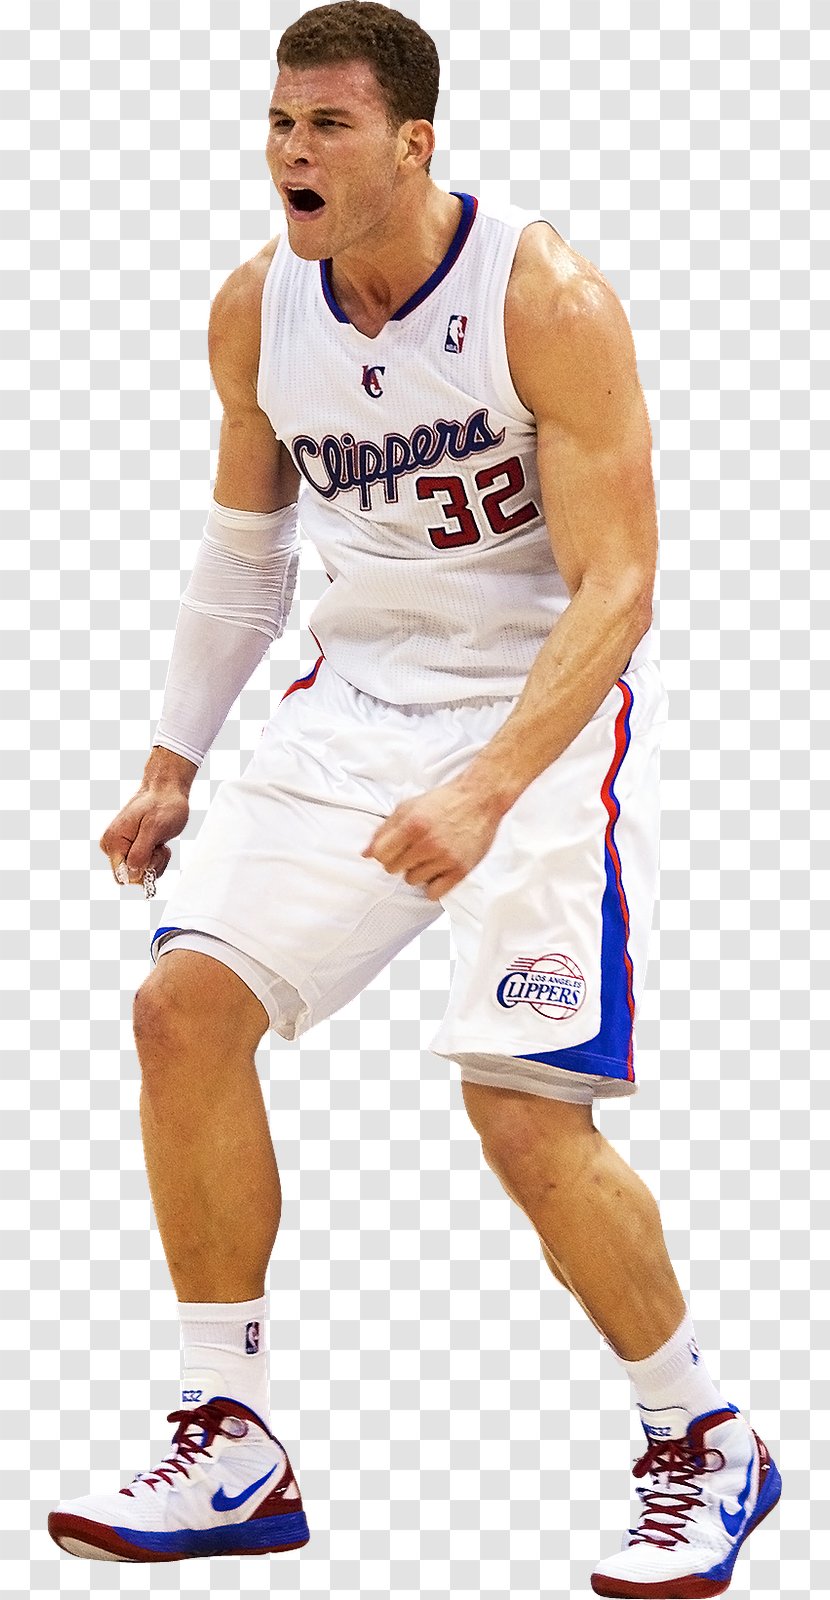 Blake Griffin Los Angeles Clippers Basketball Player Athlete Transparent PNG